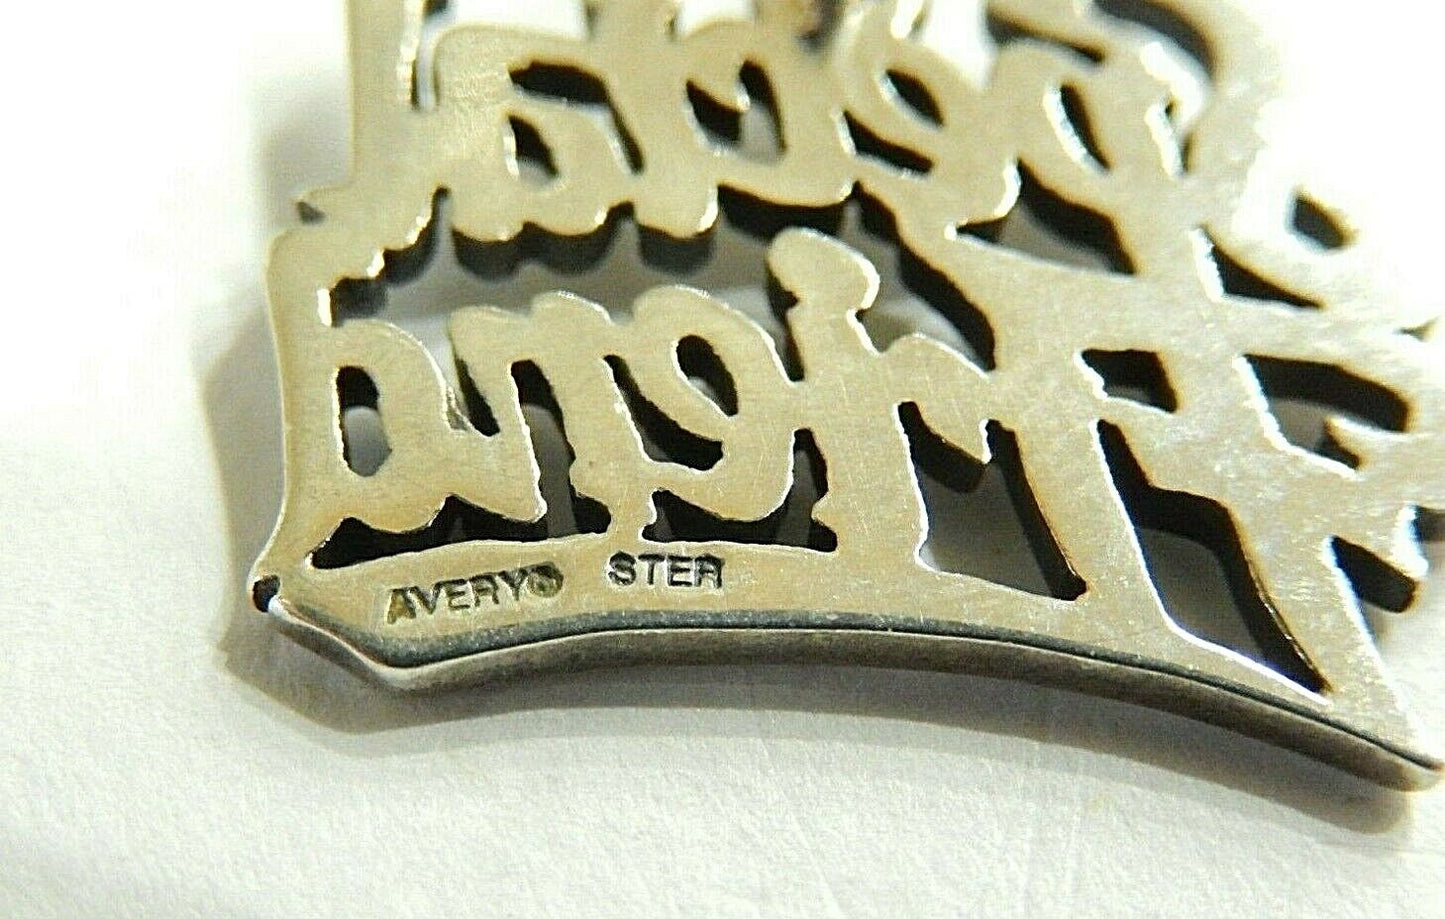 *JAMES AVERY*  R E T I R E D  - Sterling Silver Special Friend Charm